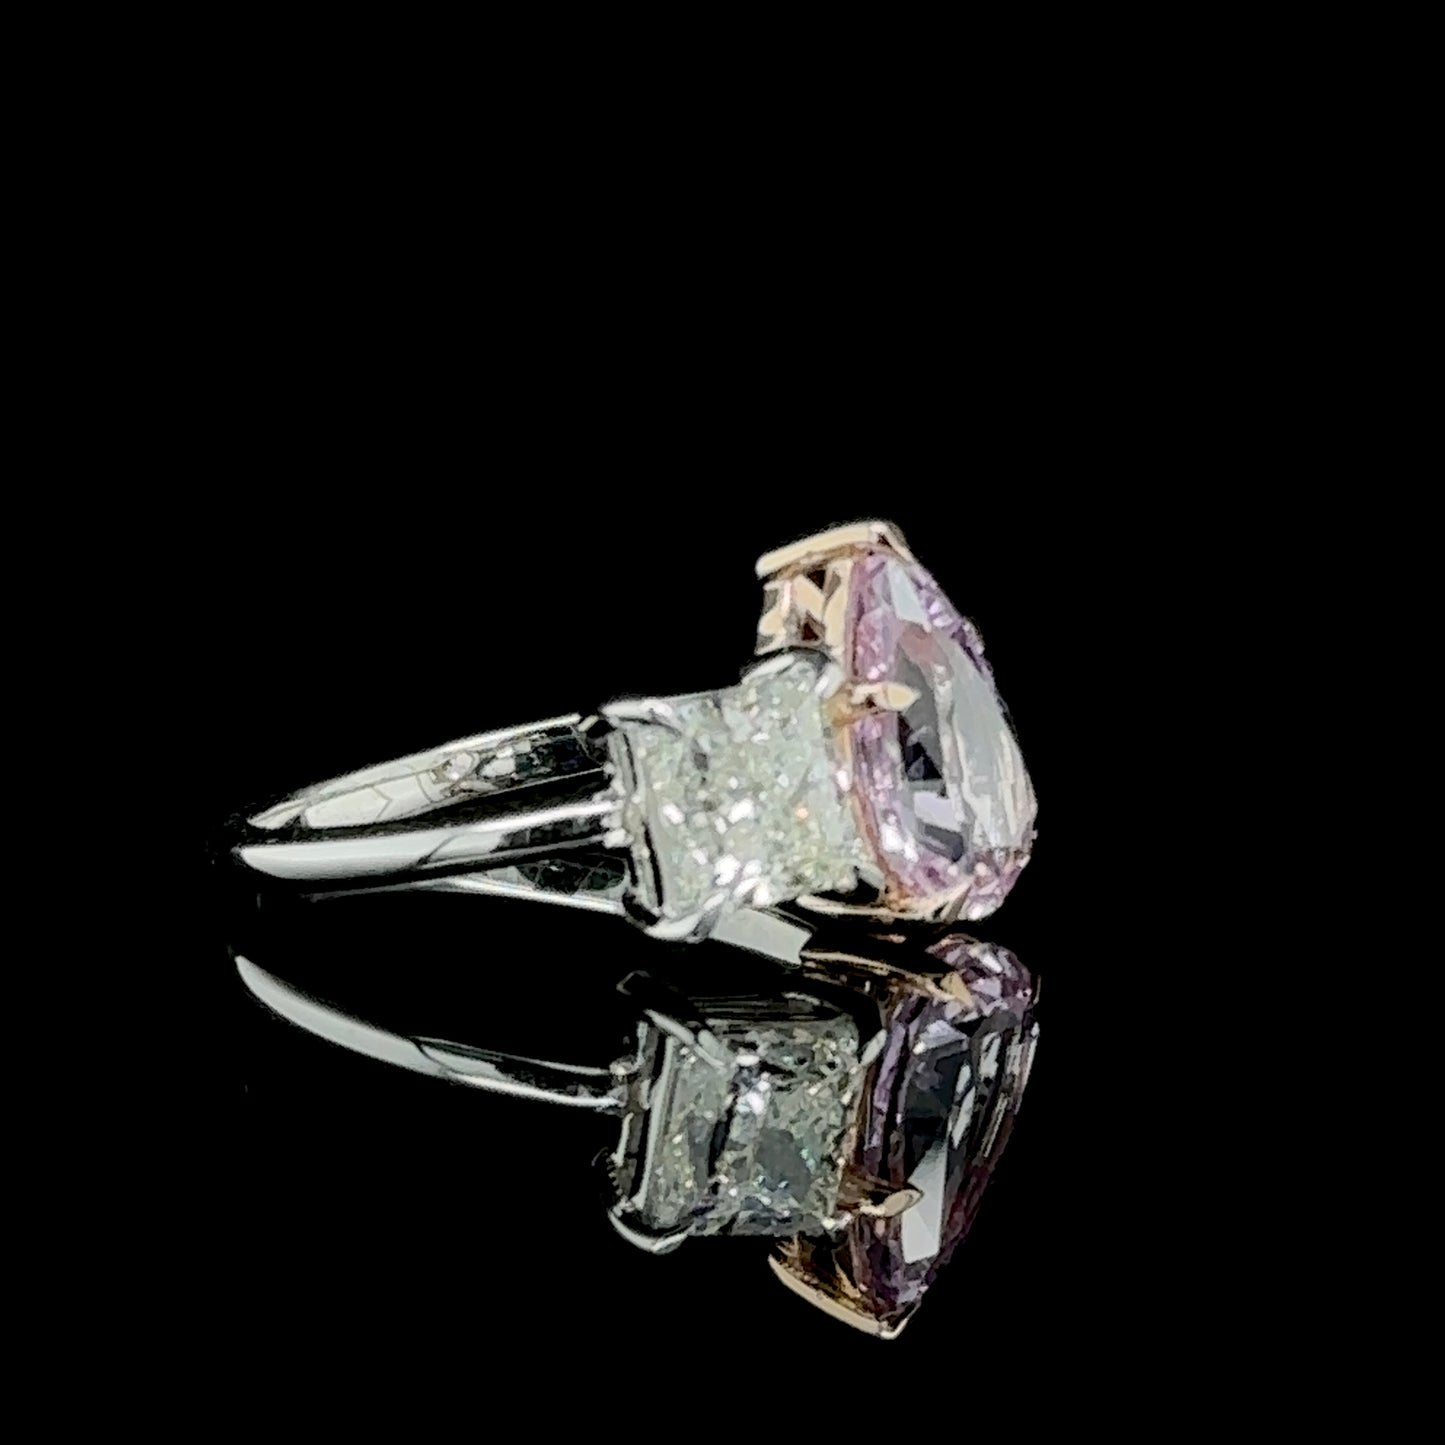 Diamond and Pink Sapphire Toi et Moi Ring